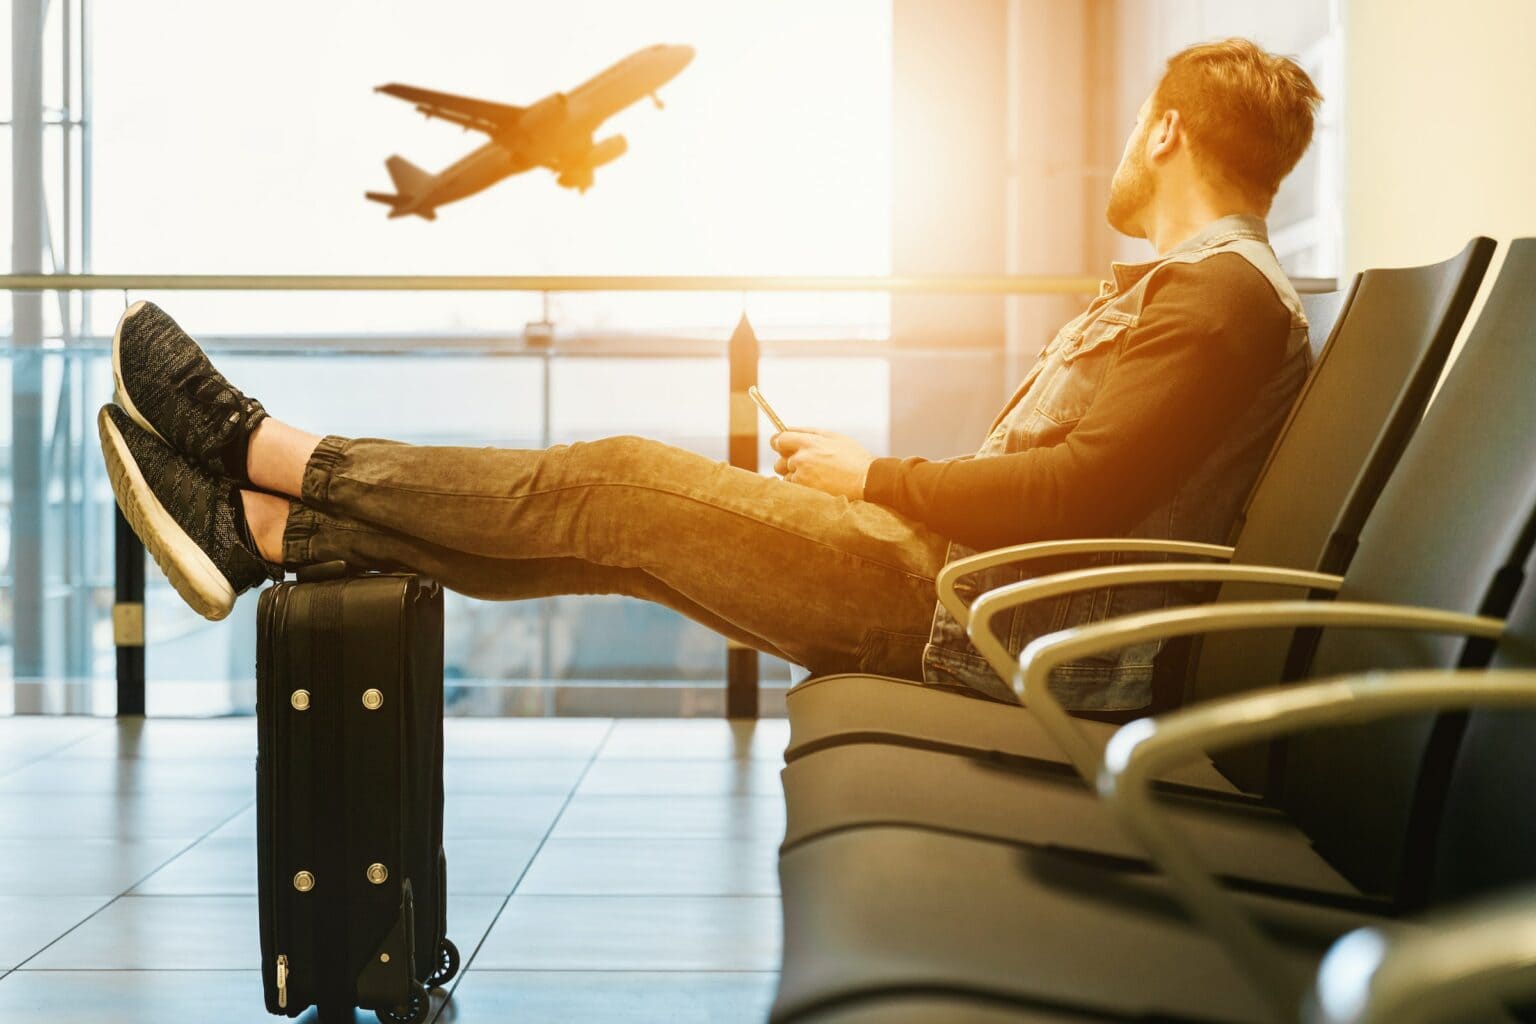 A man sits in an airport terminal with his feet resting on his suitcase and an iPhone with eSIM for international data in his hand. A plane is taking off outside the window.